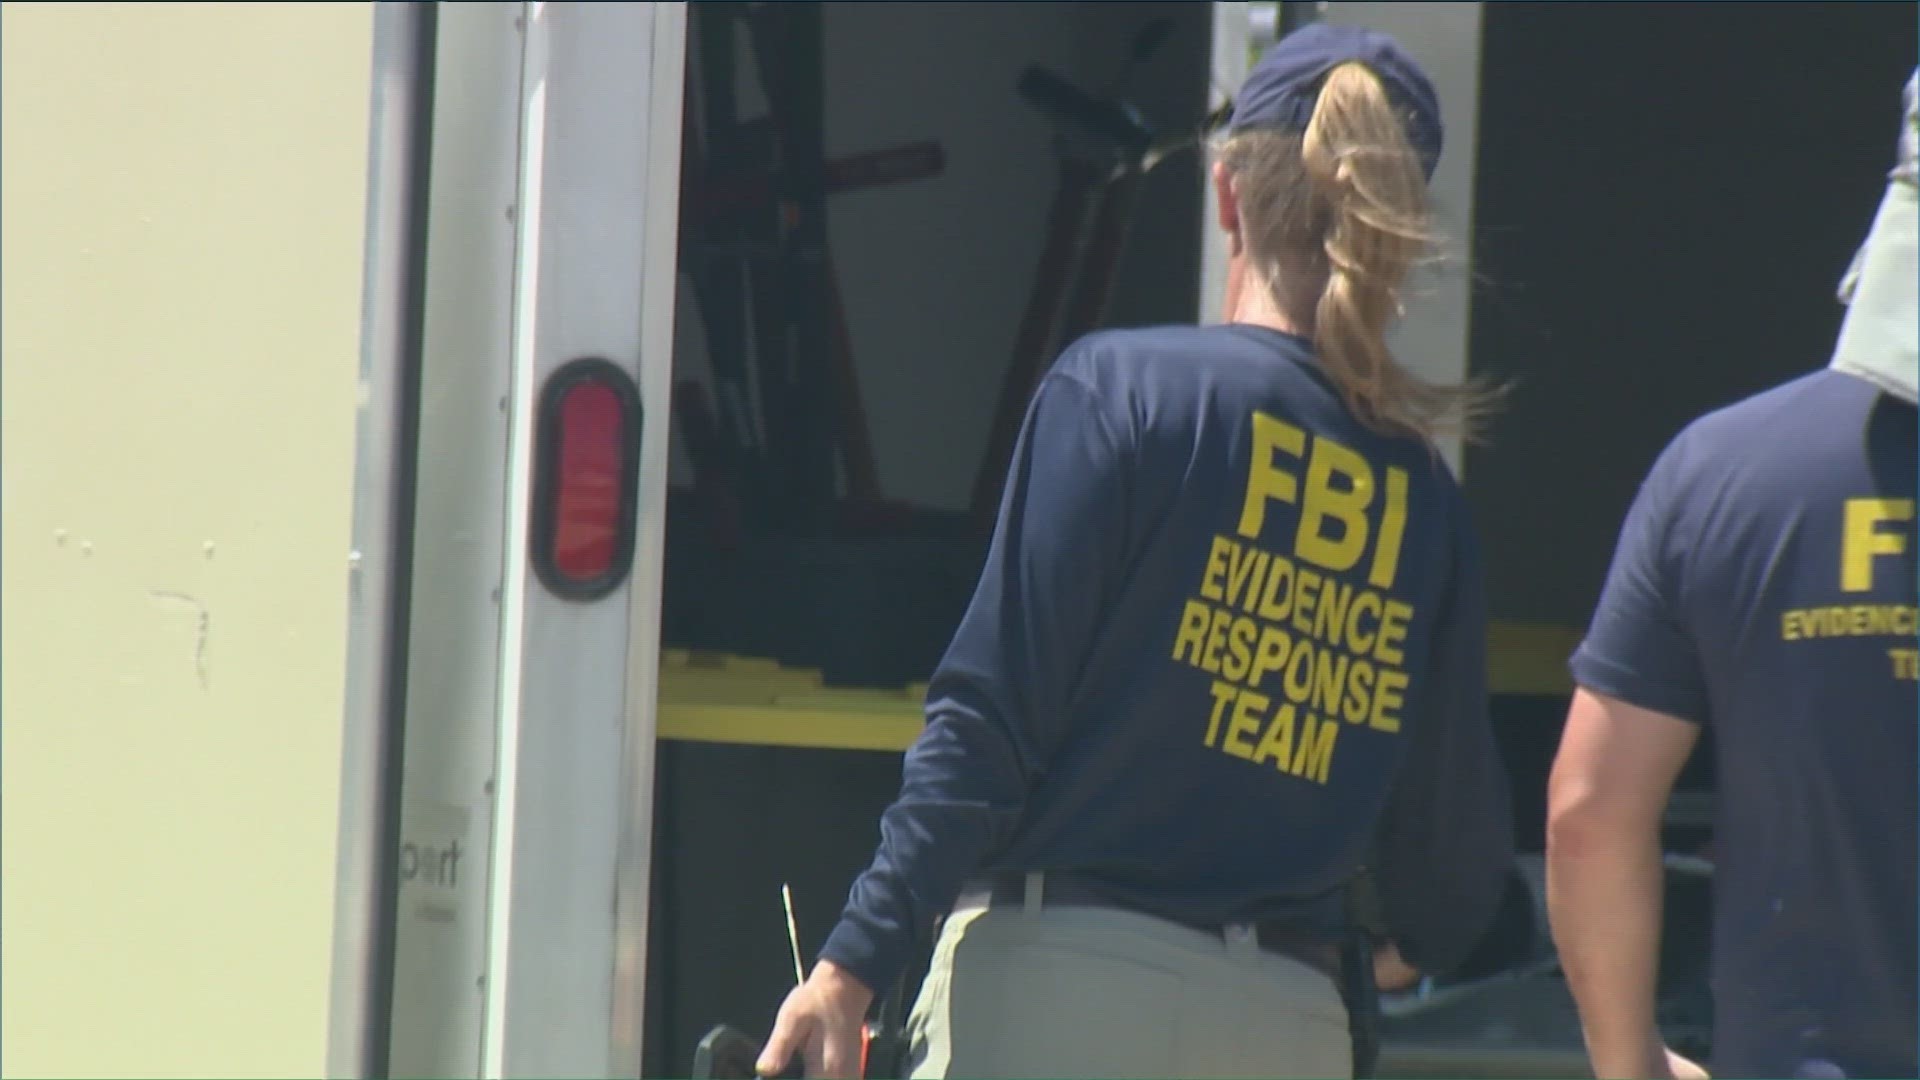 Law enforcement, including the FBI, searched a field in Pflugerville on Wednesday. The search is related to alleged serial killer Raul Meza's case.